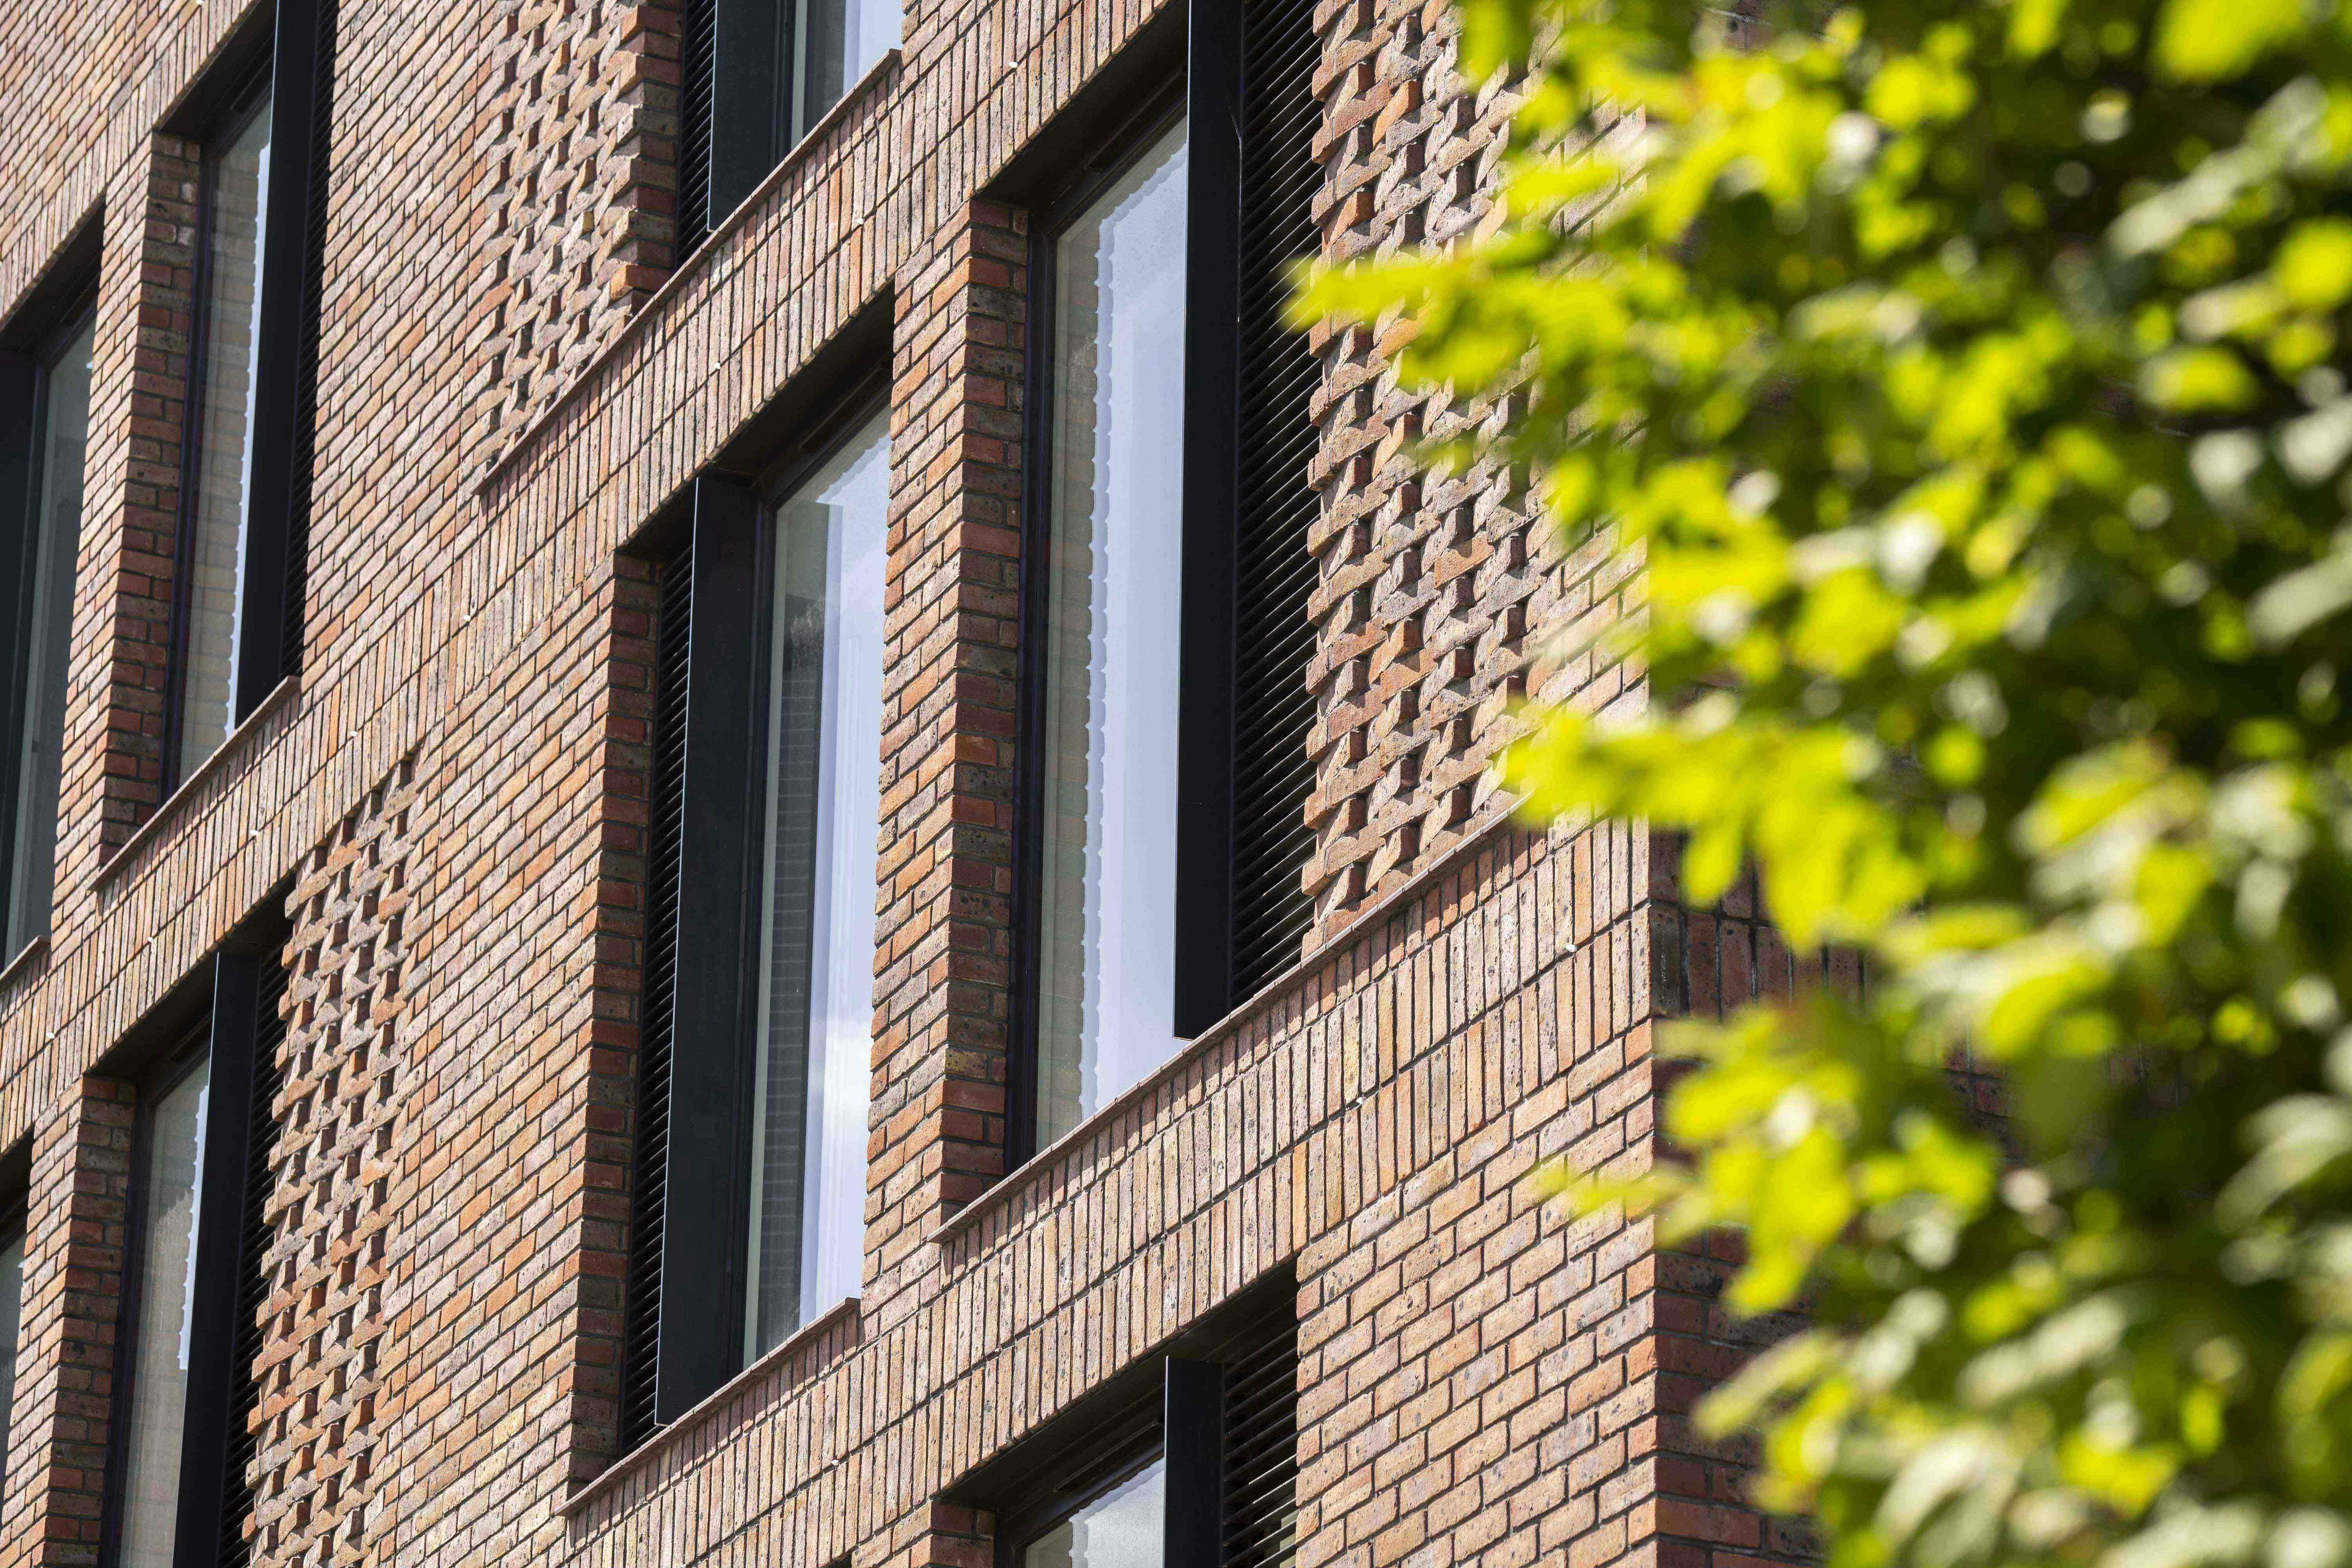 Brick exterior of a university building with rows of windows and the edge of a tree on the right.